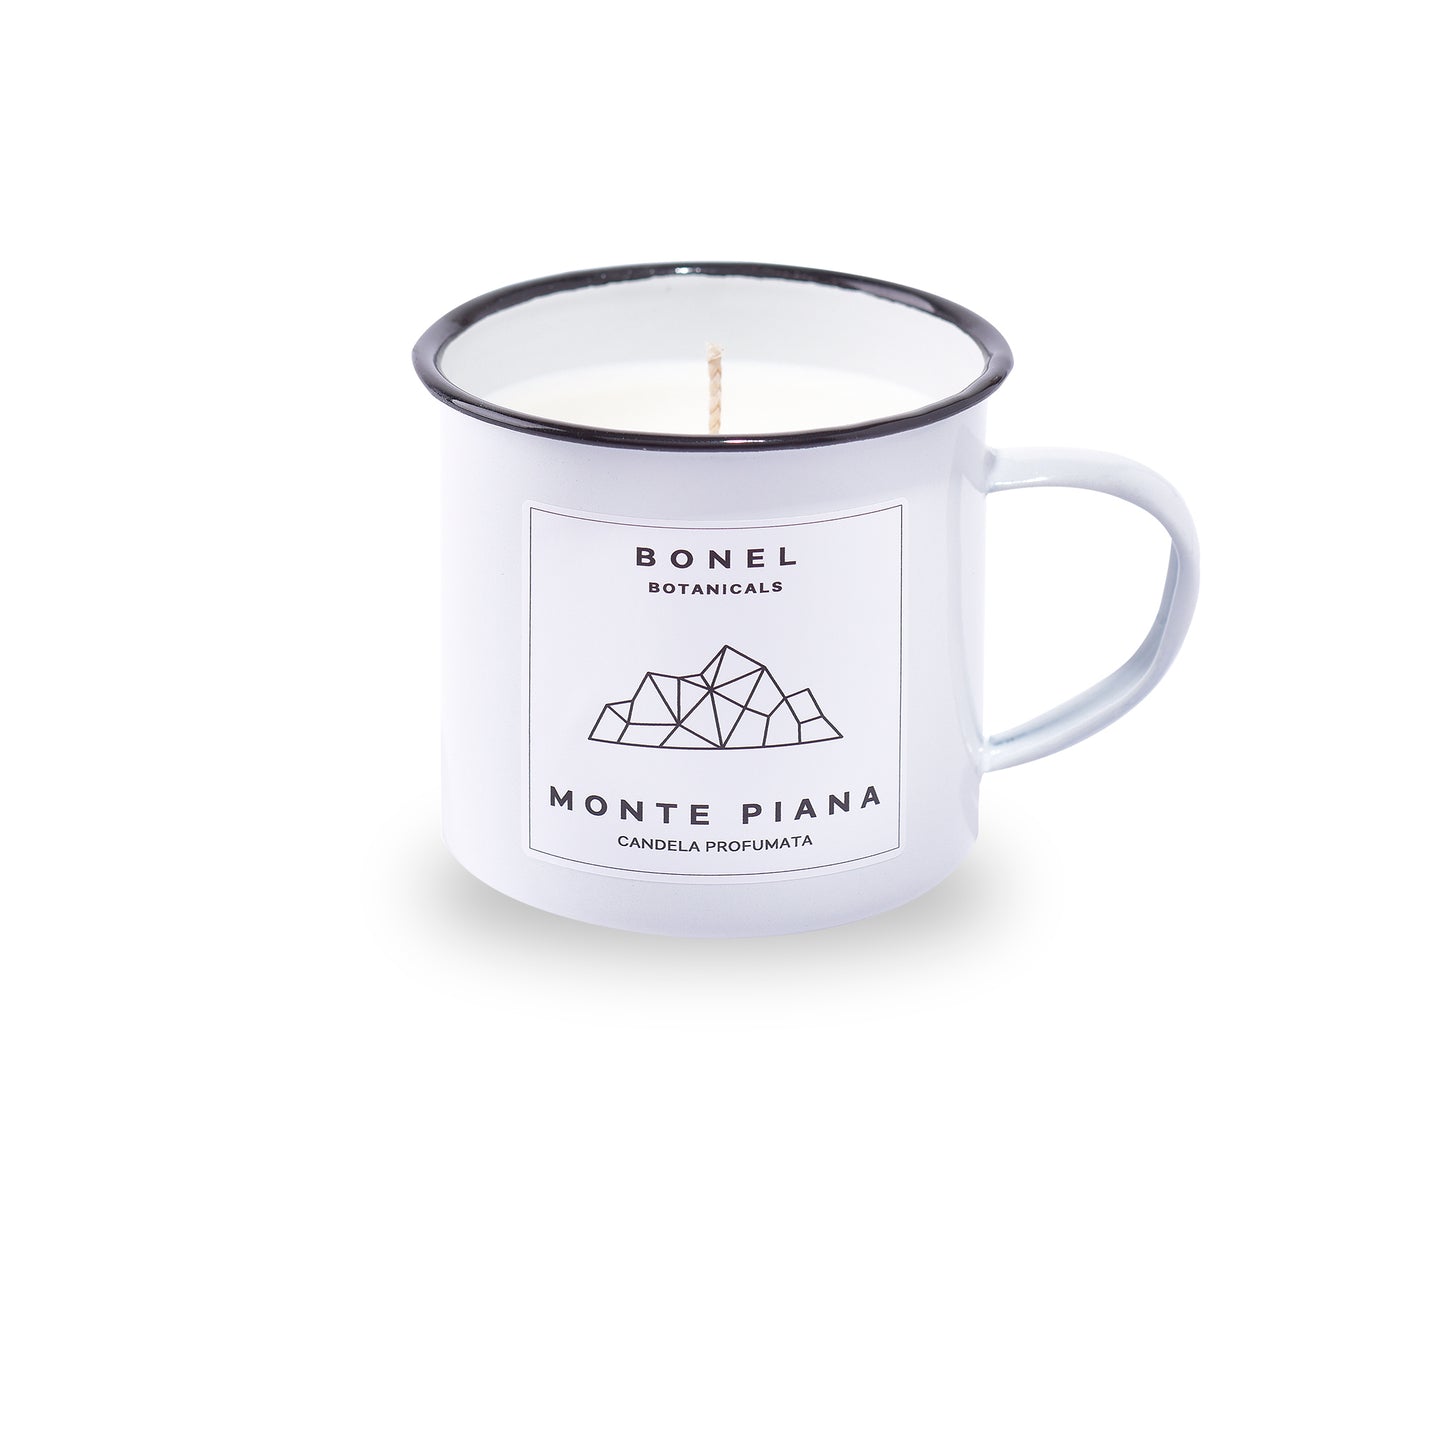 MONTE PIANA Scented Candle